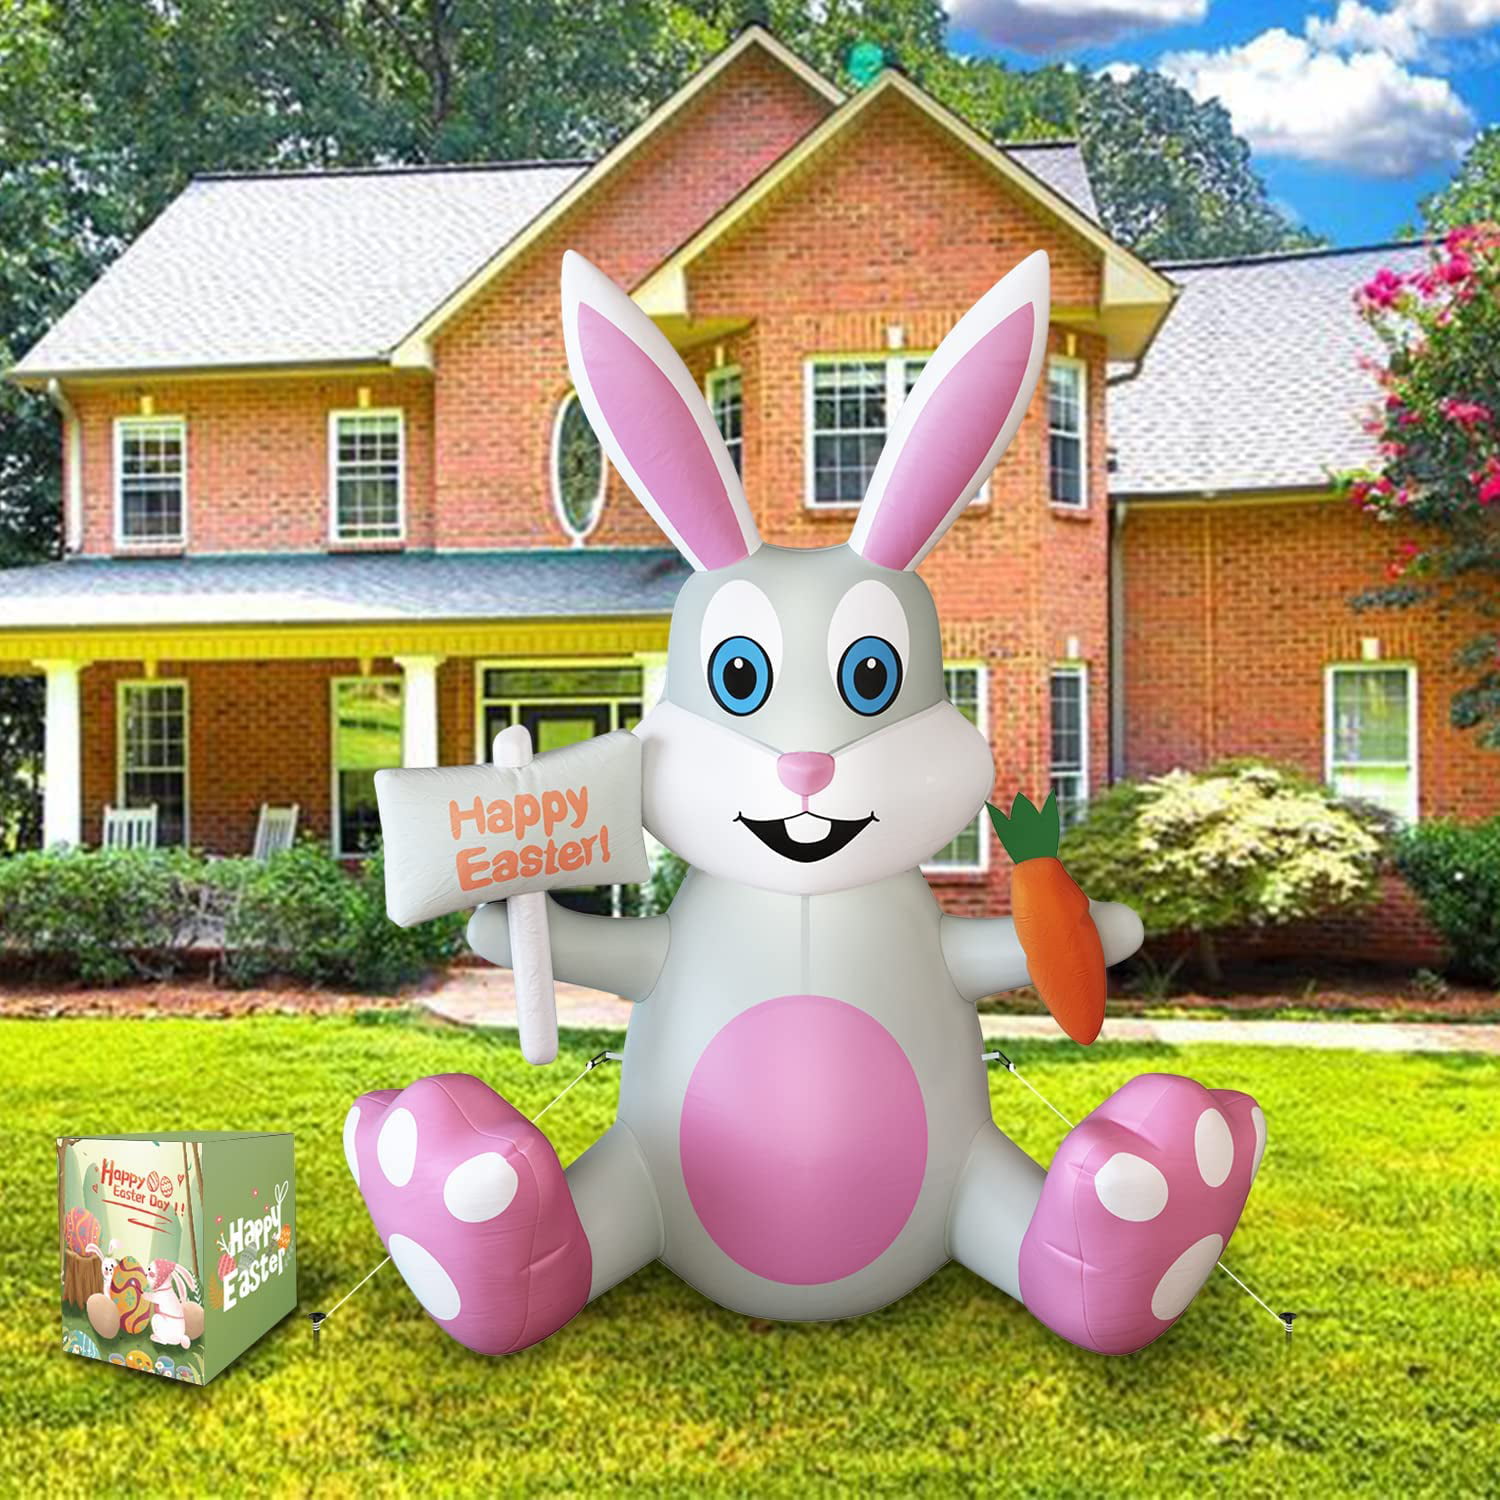 7 Ft Happy Easter Bunny Lighted Airblown Inflatable Lighted Yard Decor 